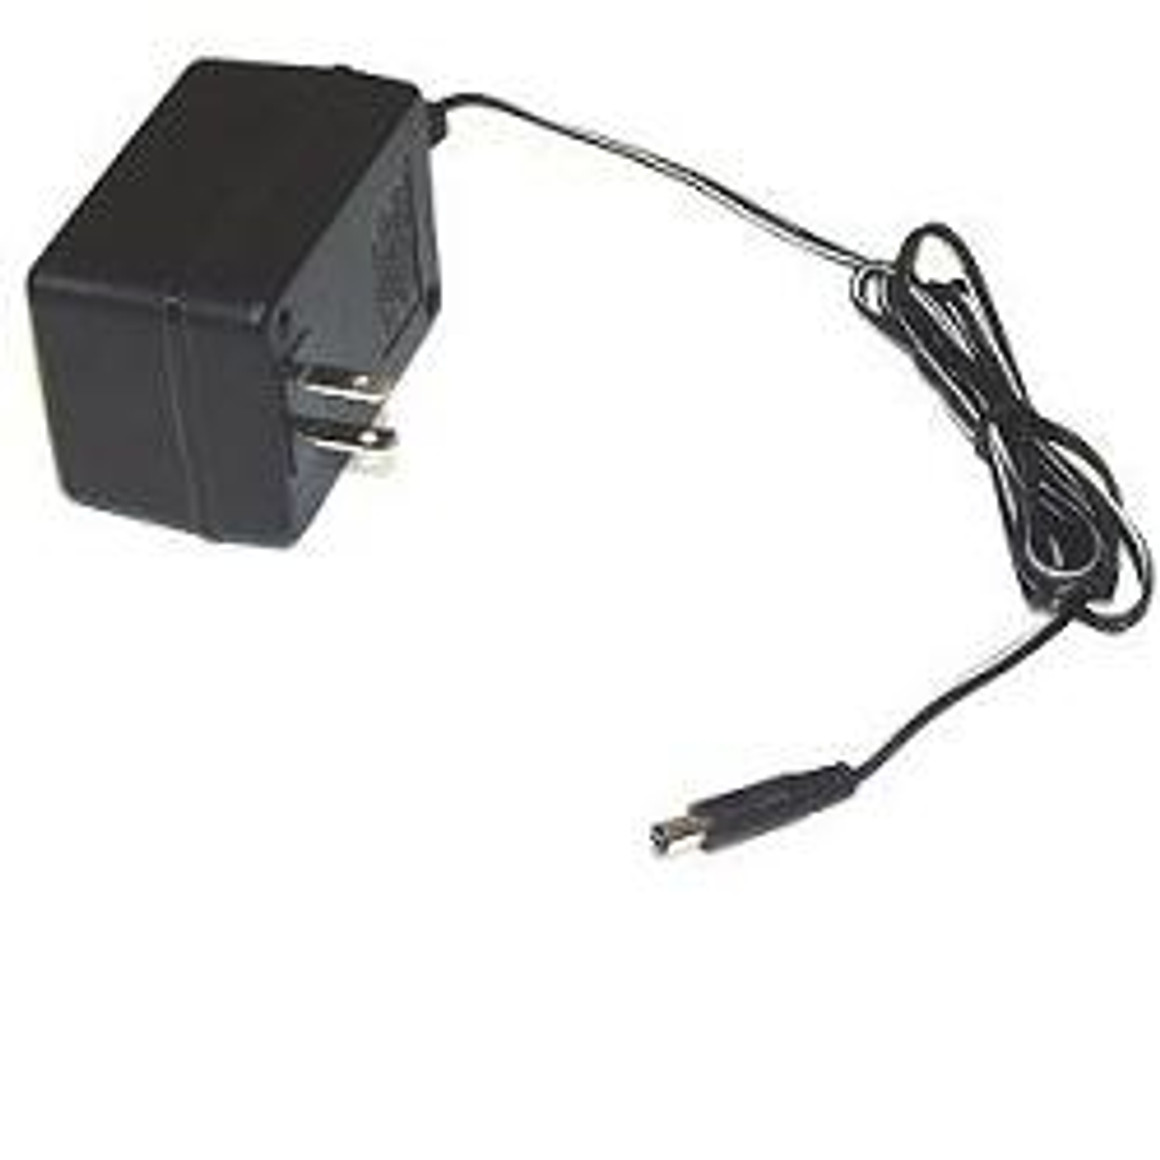 Power Cord for DS6100, DS7100, DS9100 Doran scale